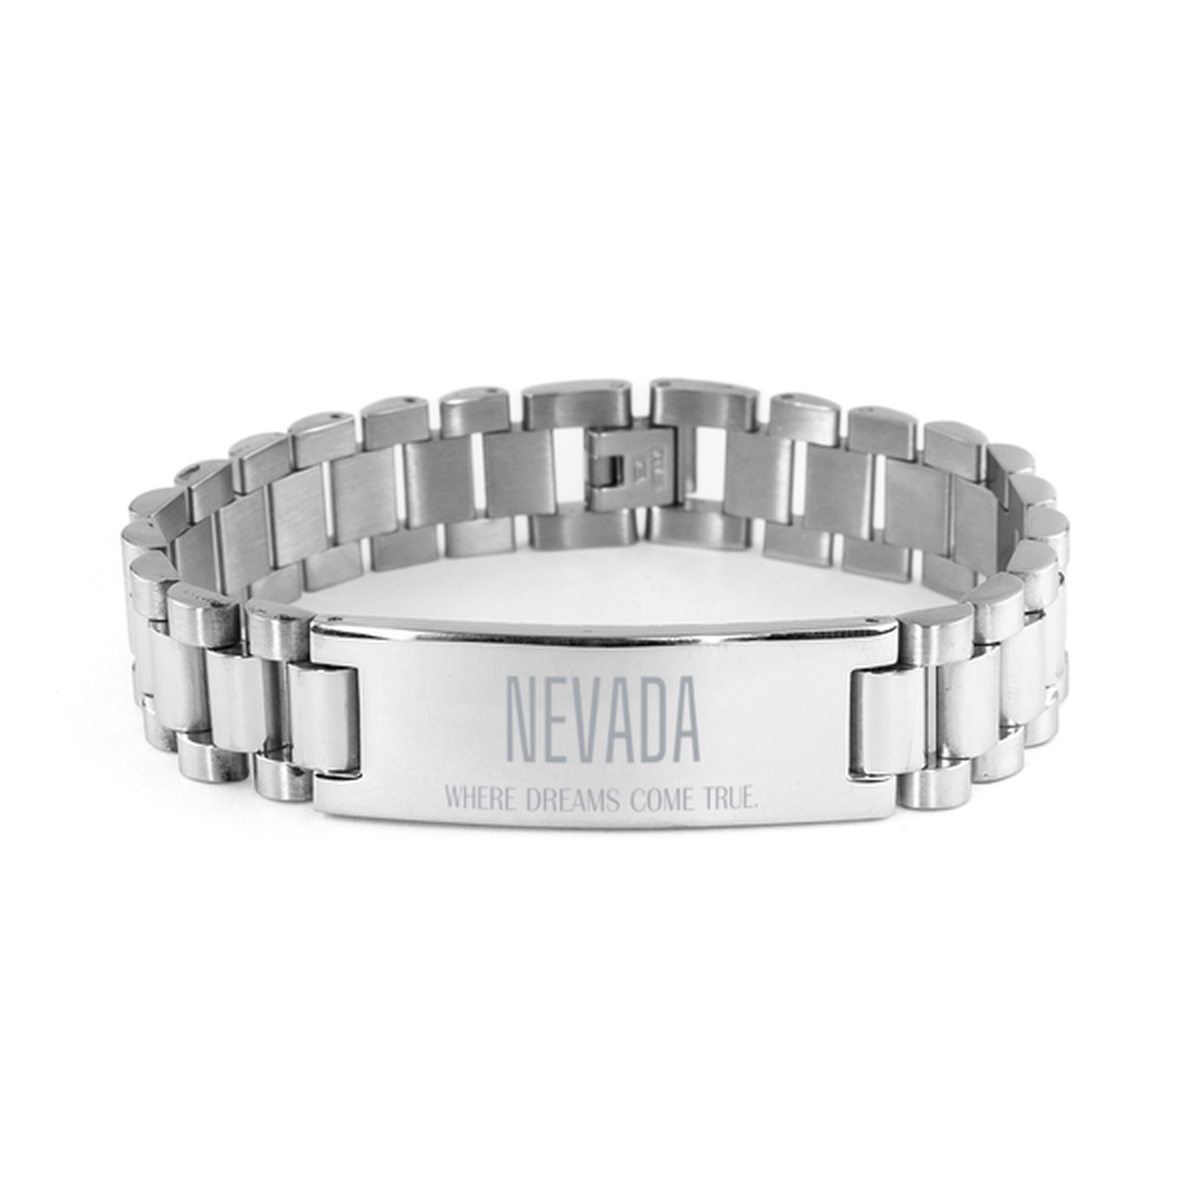 Love Nevada State Ladder Stainless Steel Bracelet, Nevada Where dreams come true, Birthday Inspirational Gifts For Nevada Men, Women, Friends